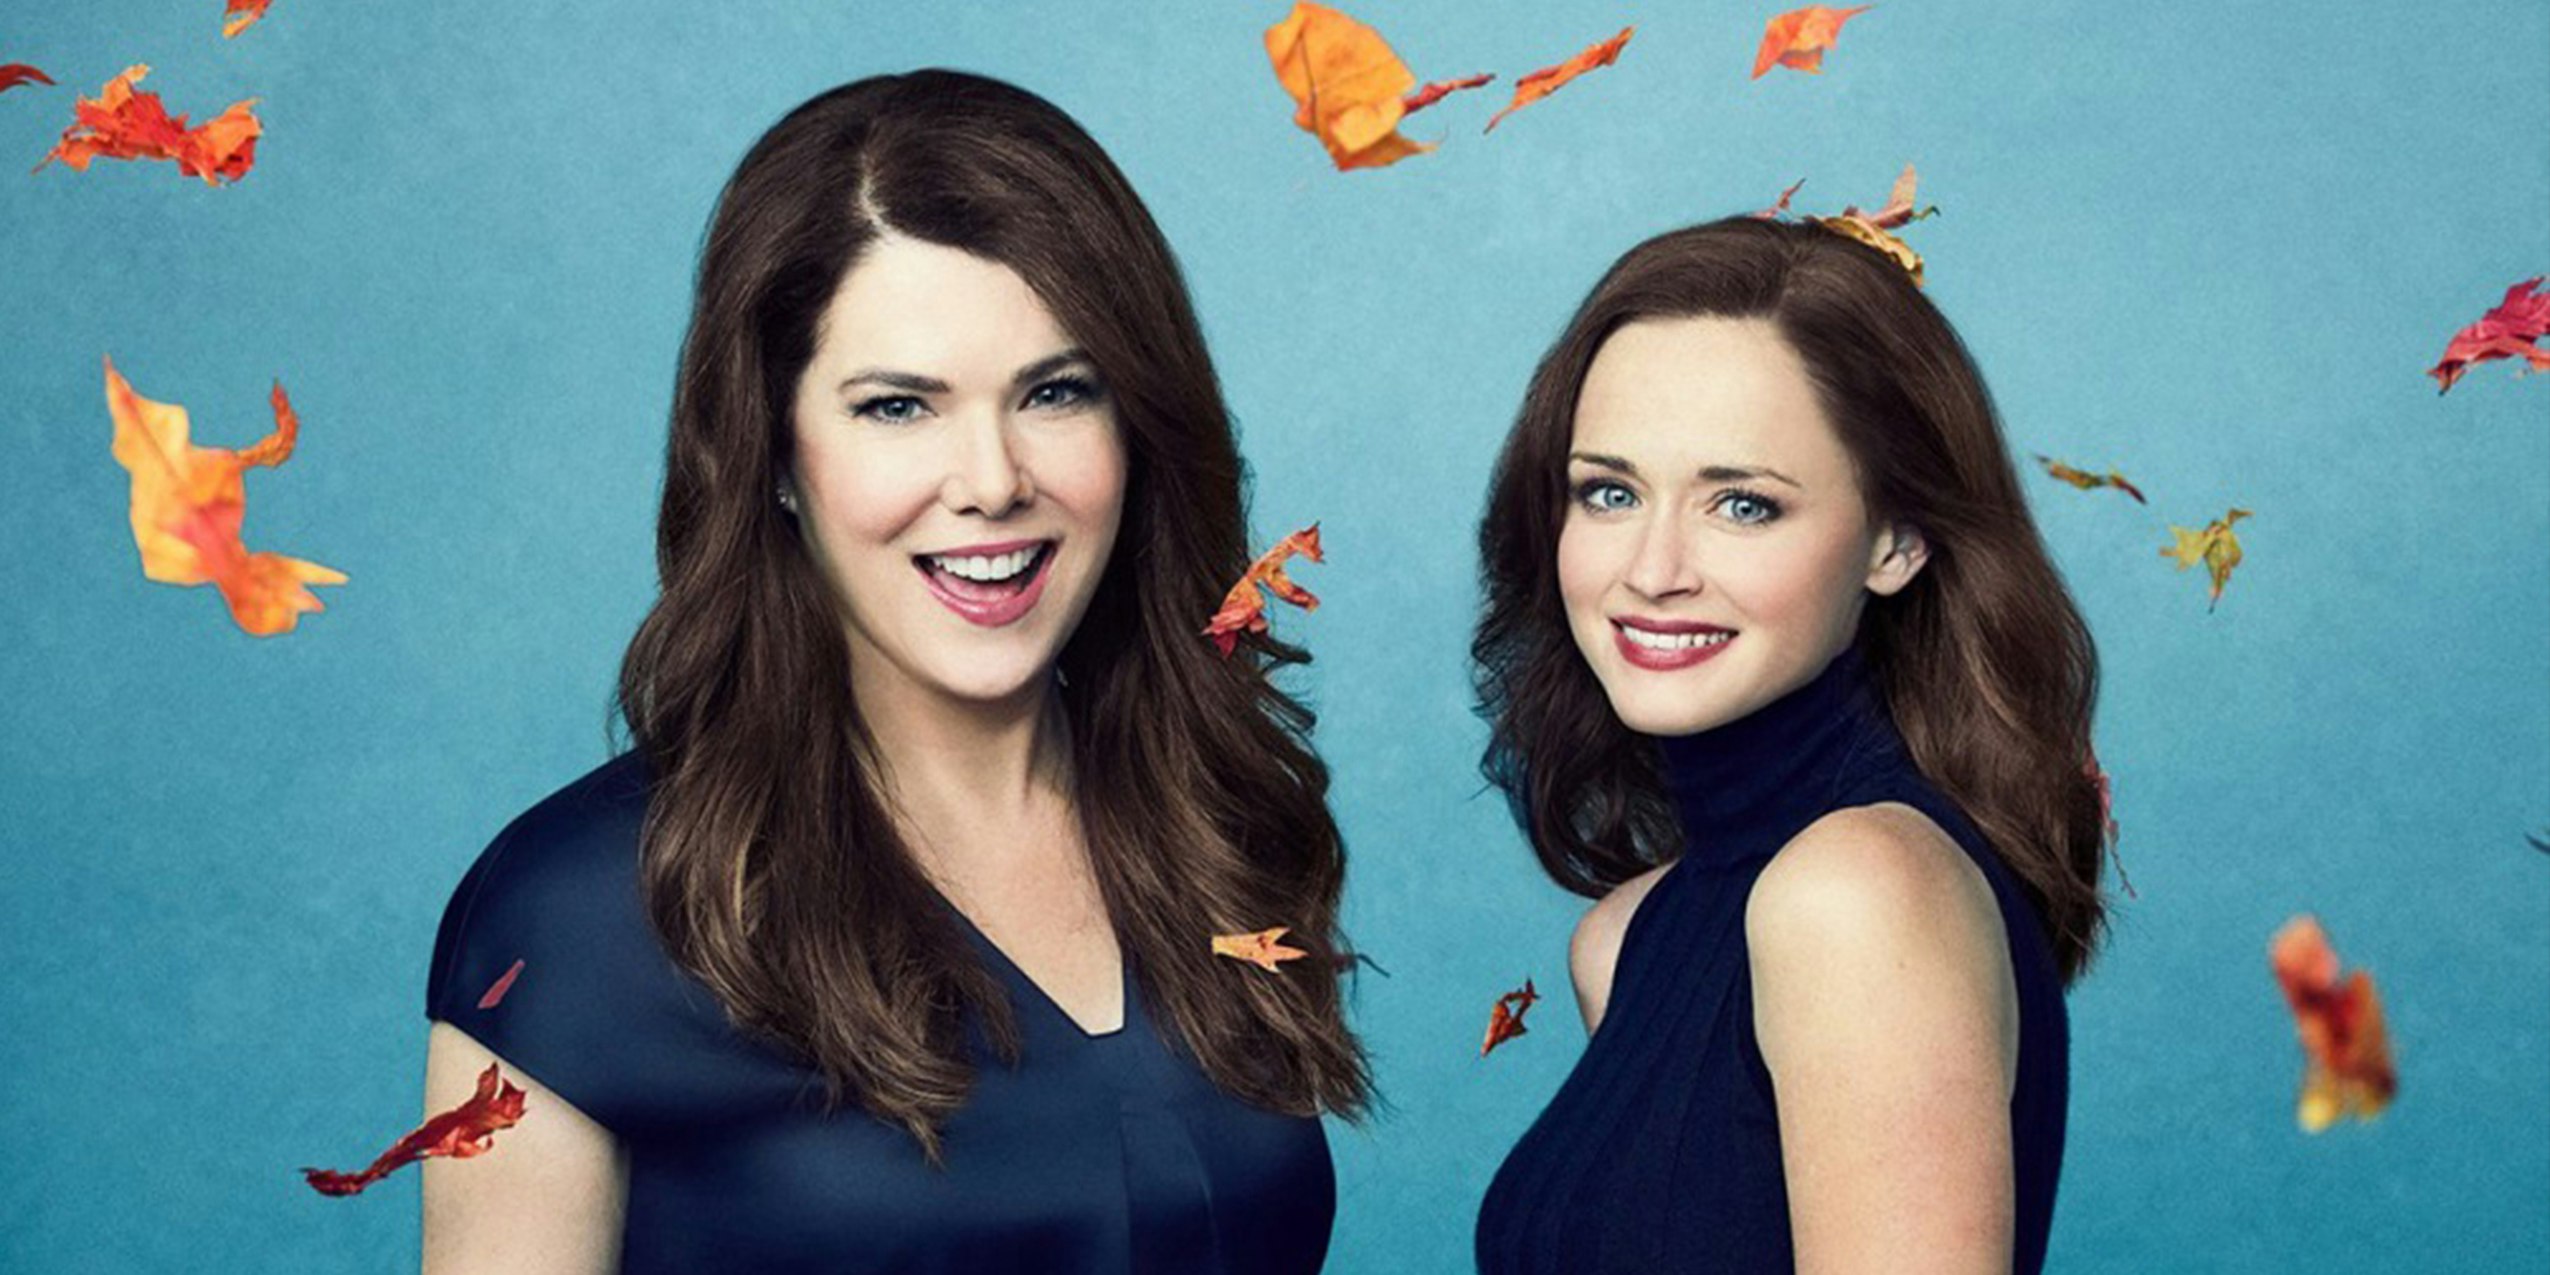 Stream 'Gilmore Girls A Year in the Life' How to Watch on The CW